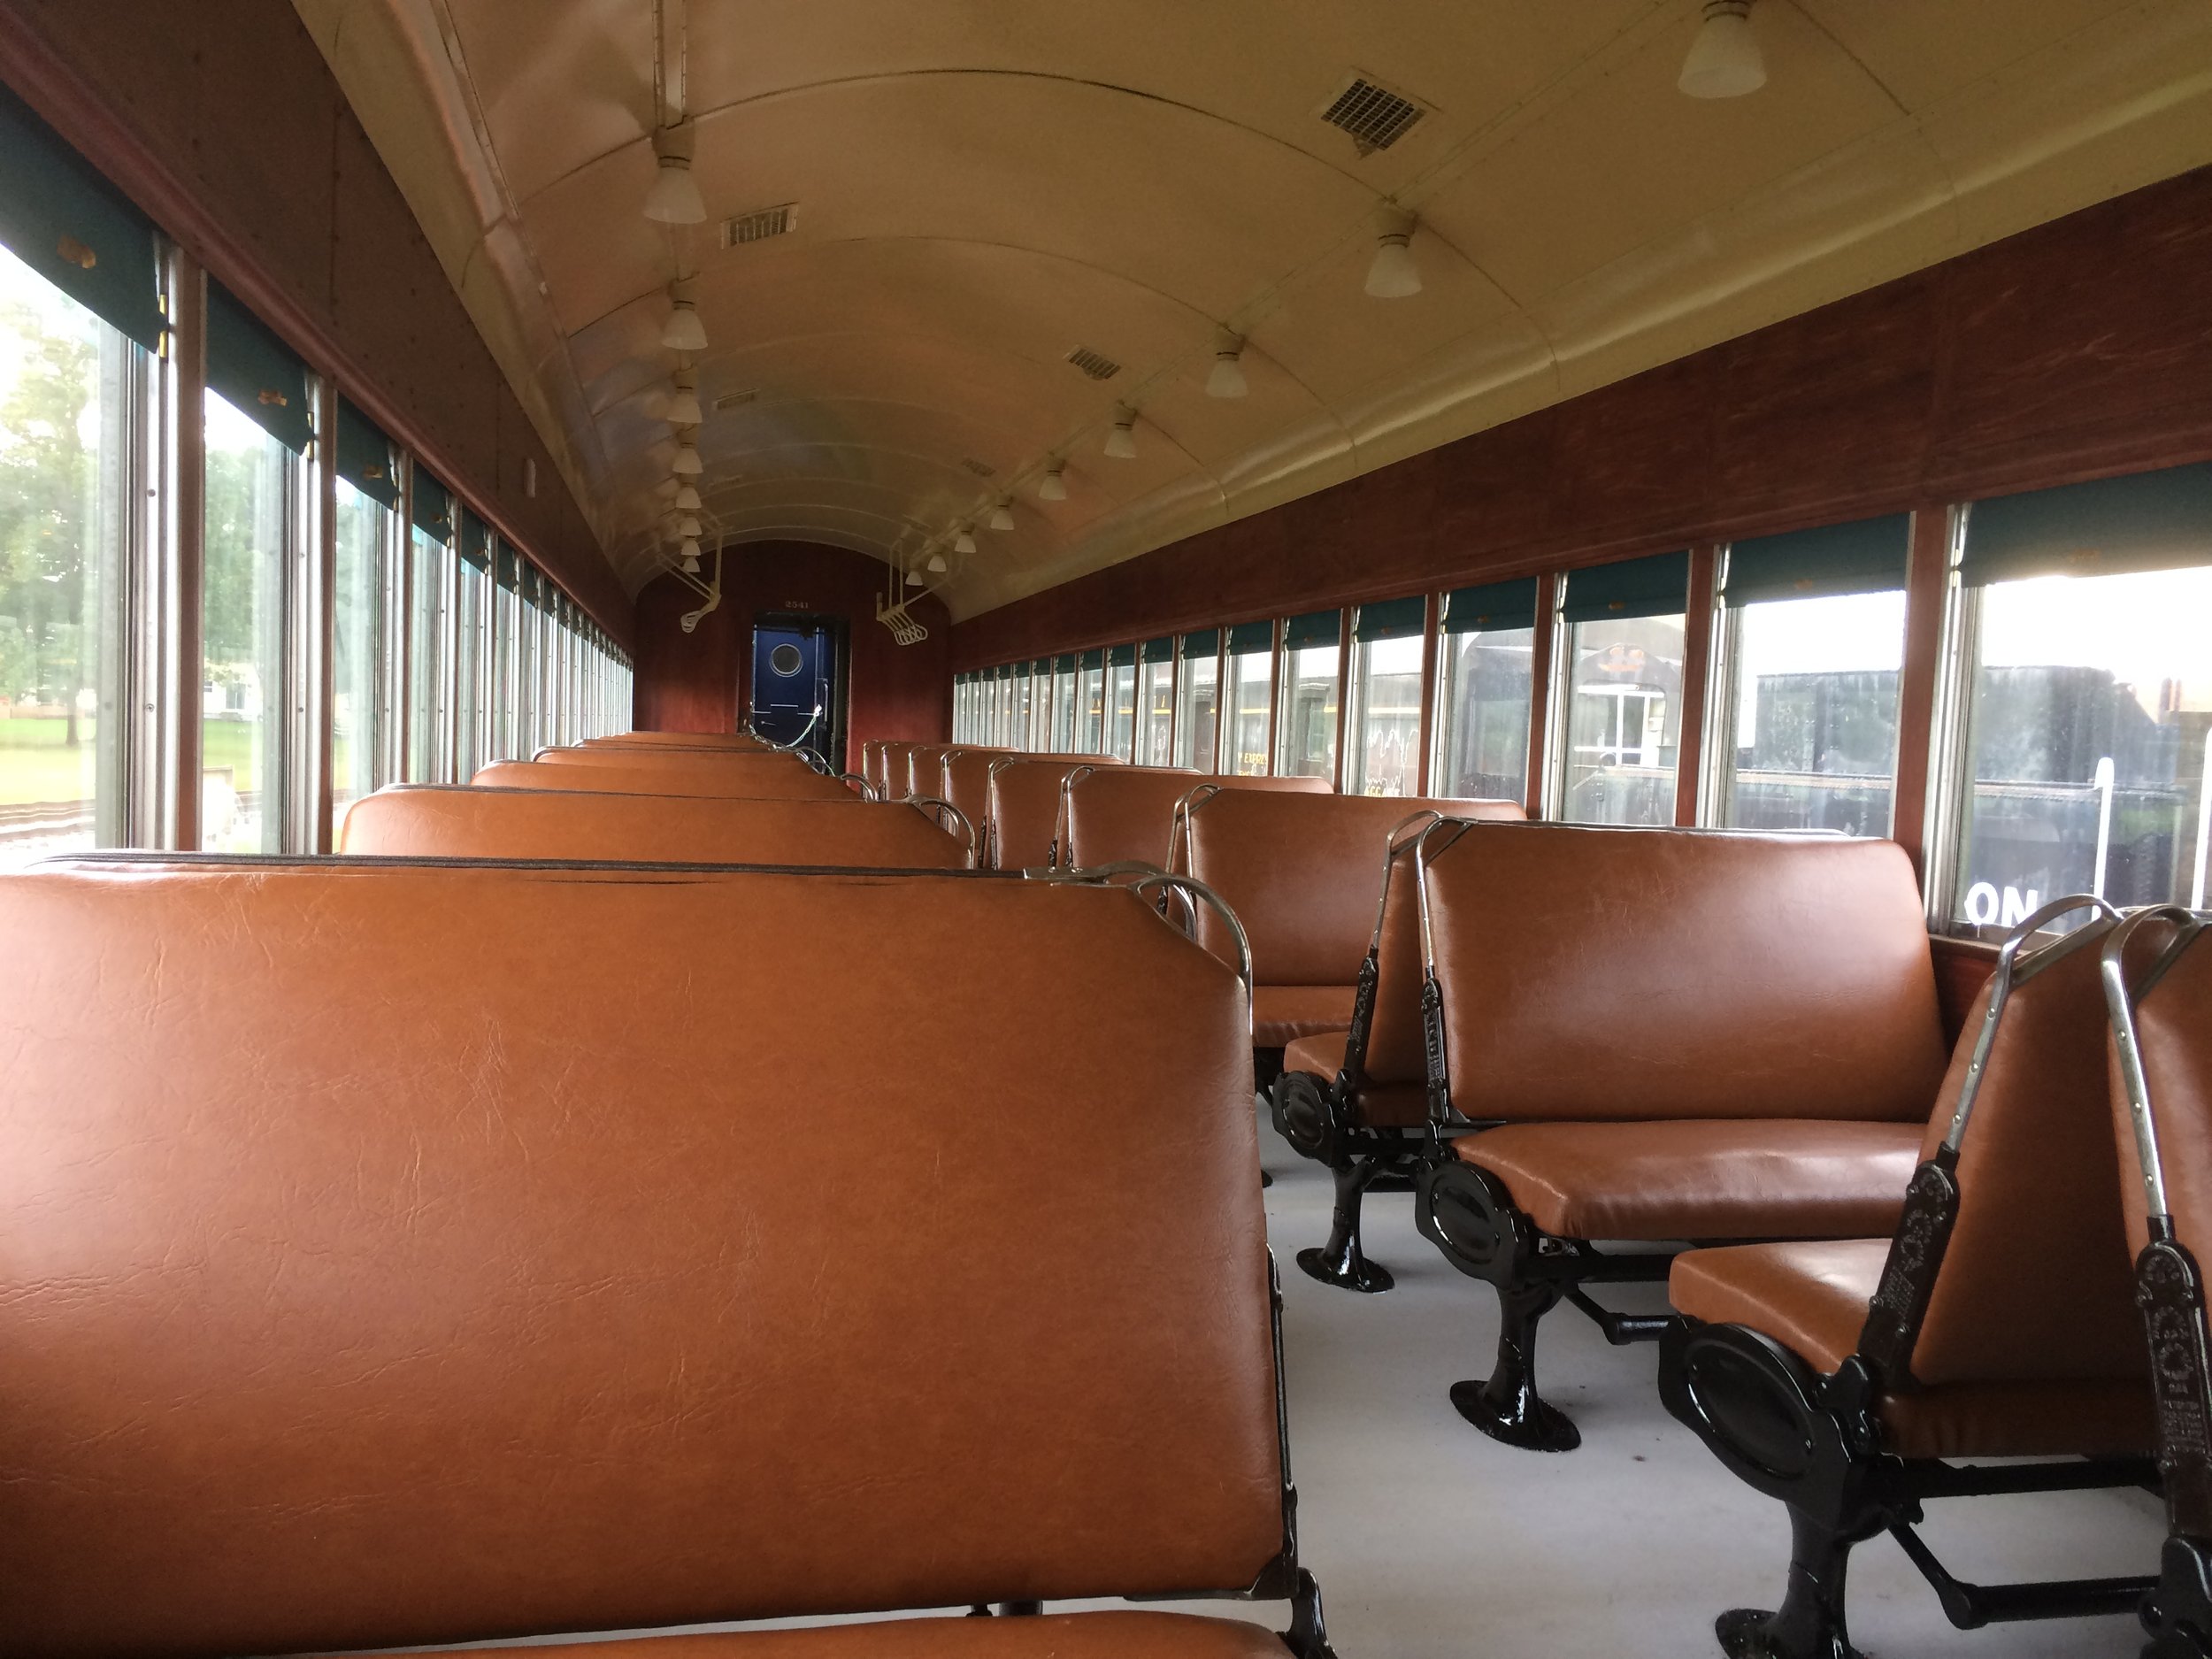  The restoration is complete! The car is now ready for many more years of service on the museum’s railroad for our guests to enjoy.   